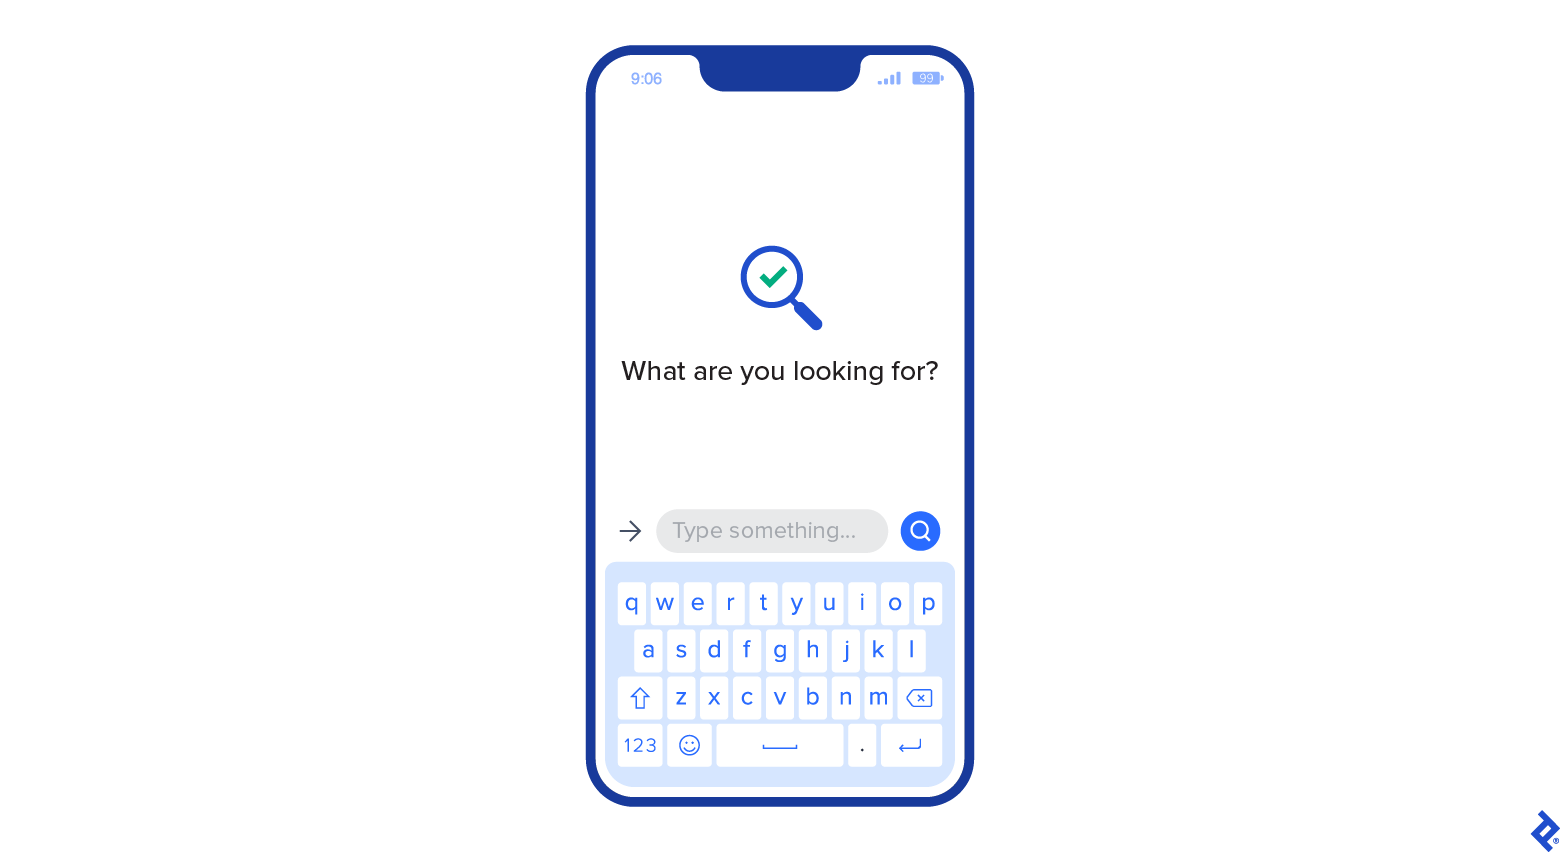 A search page on a mobile screen shows a conversational chatbot asking the user, “What are you looking for?” with a magnifying glass icon.